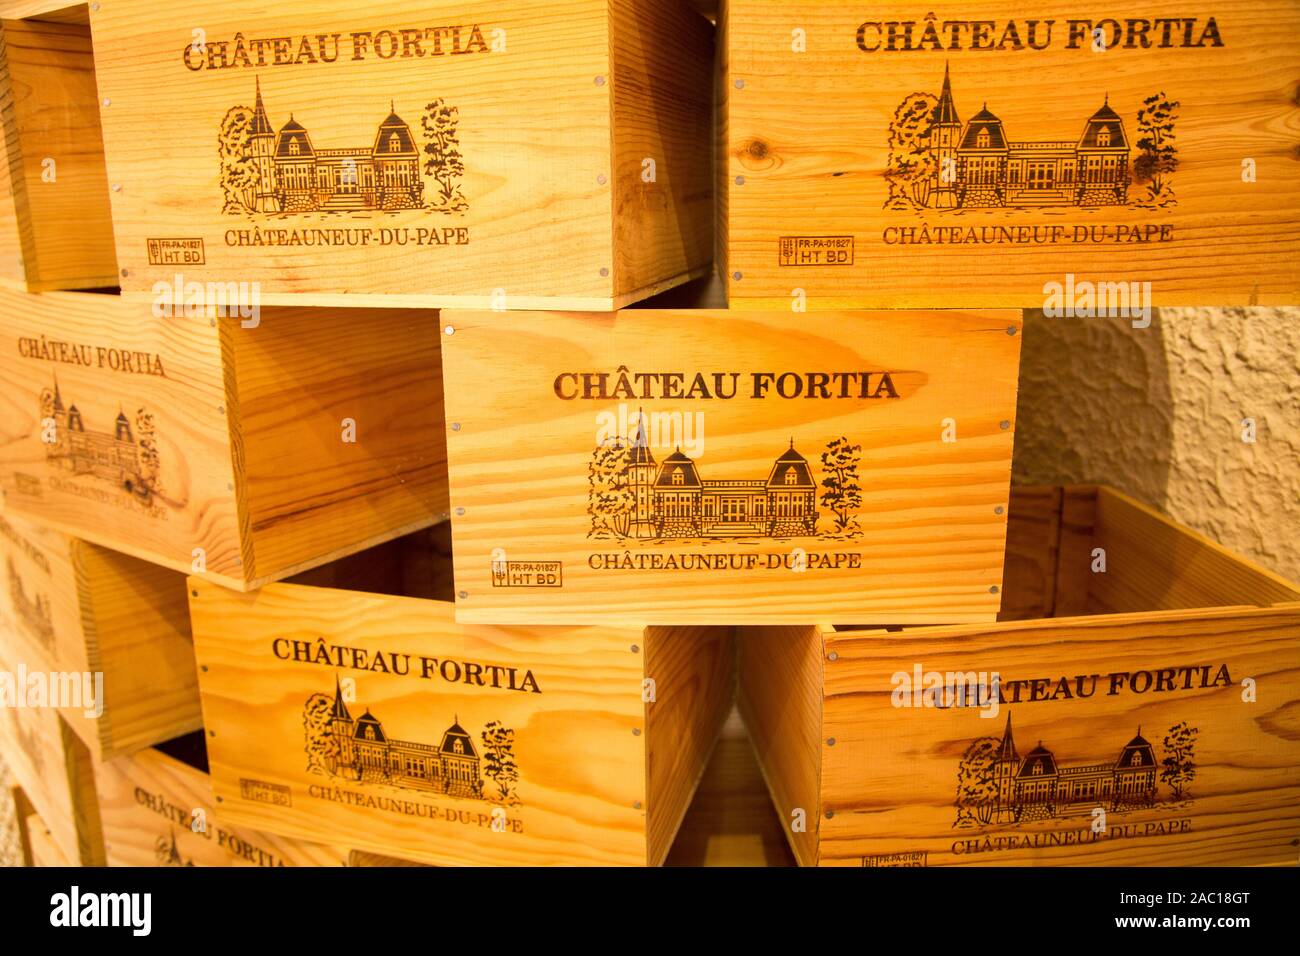 Cases of wine in the Chateauneuf du Pape region of France Stock Photo